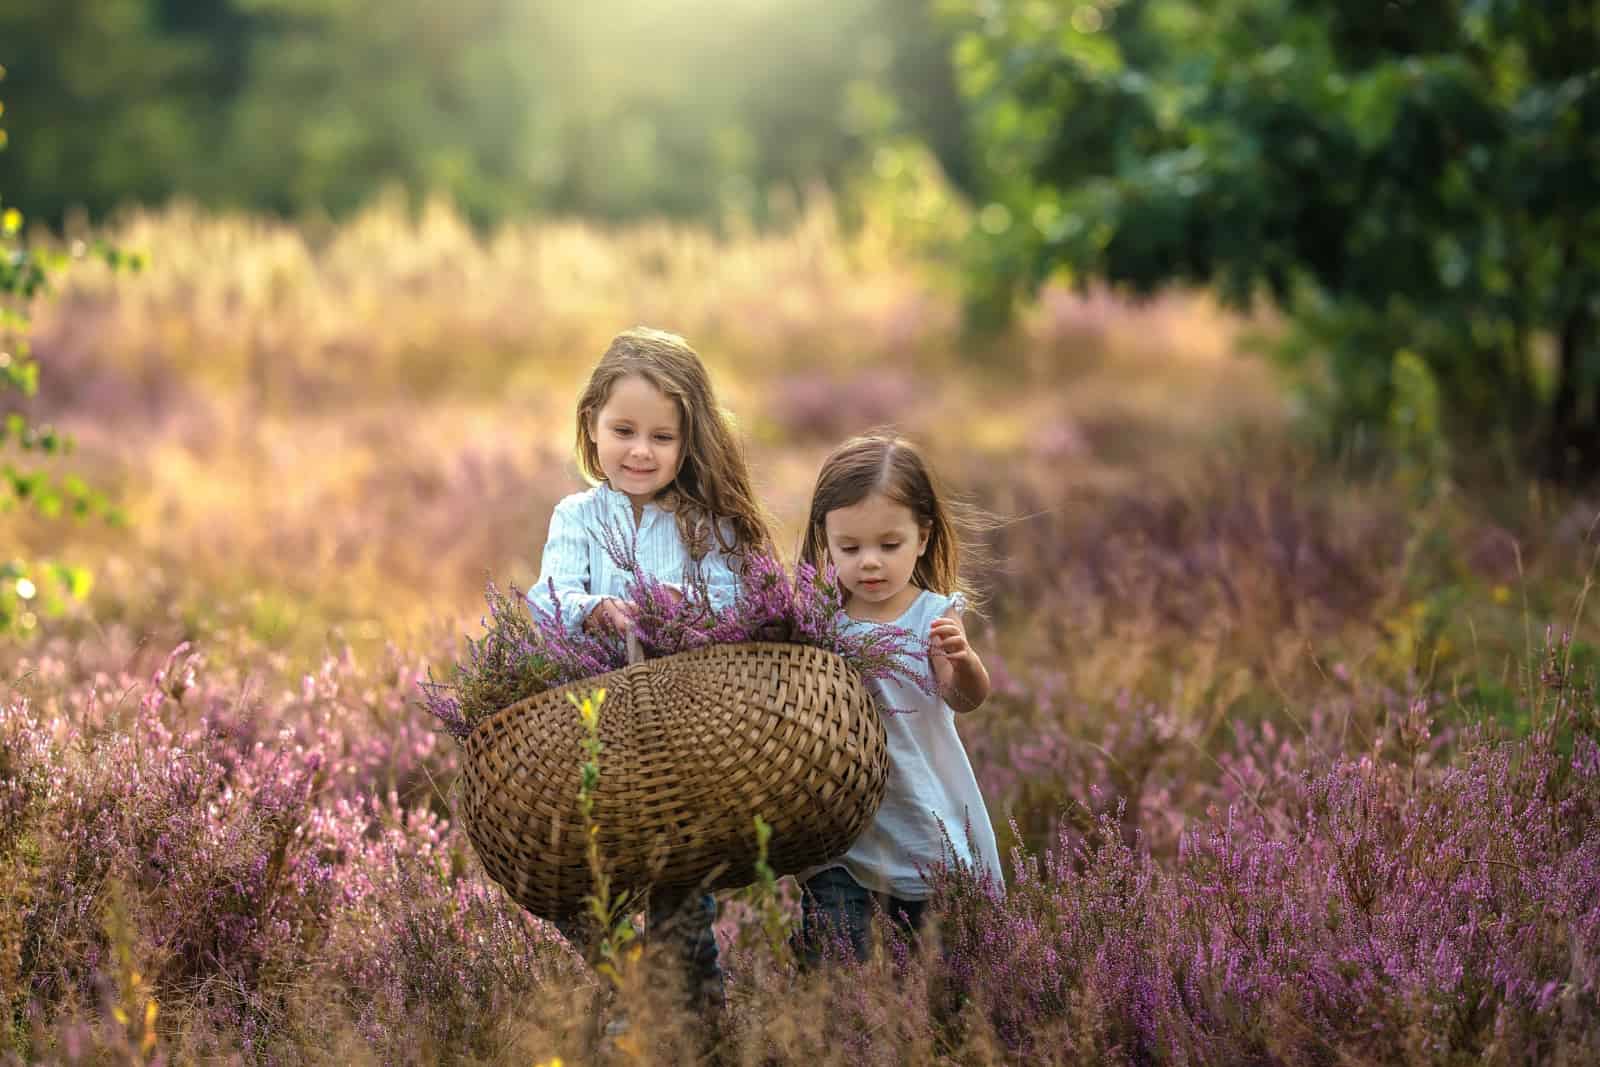 Beautiful sisters with a basket of heather are walking across the field and smiling.